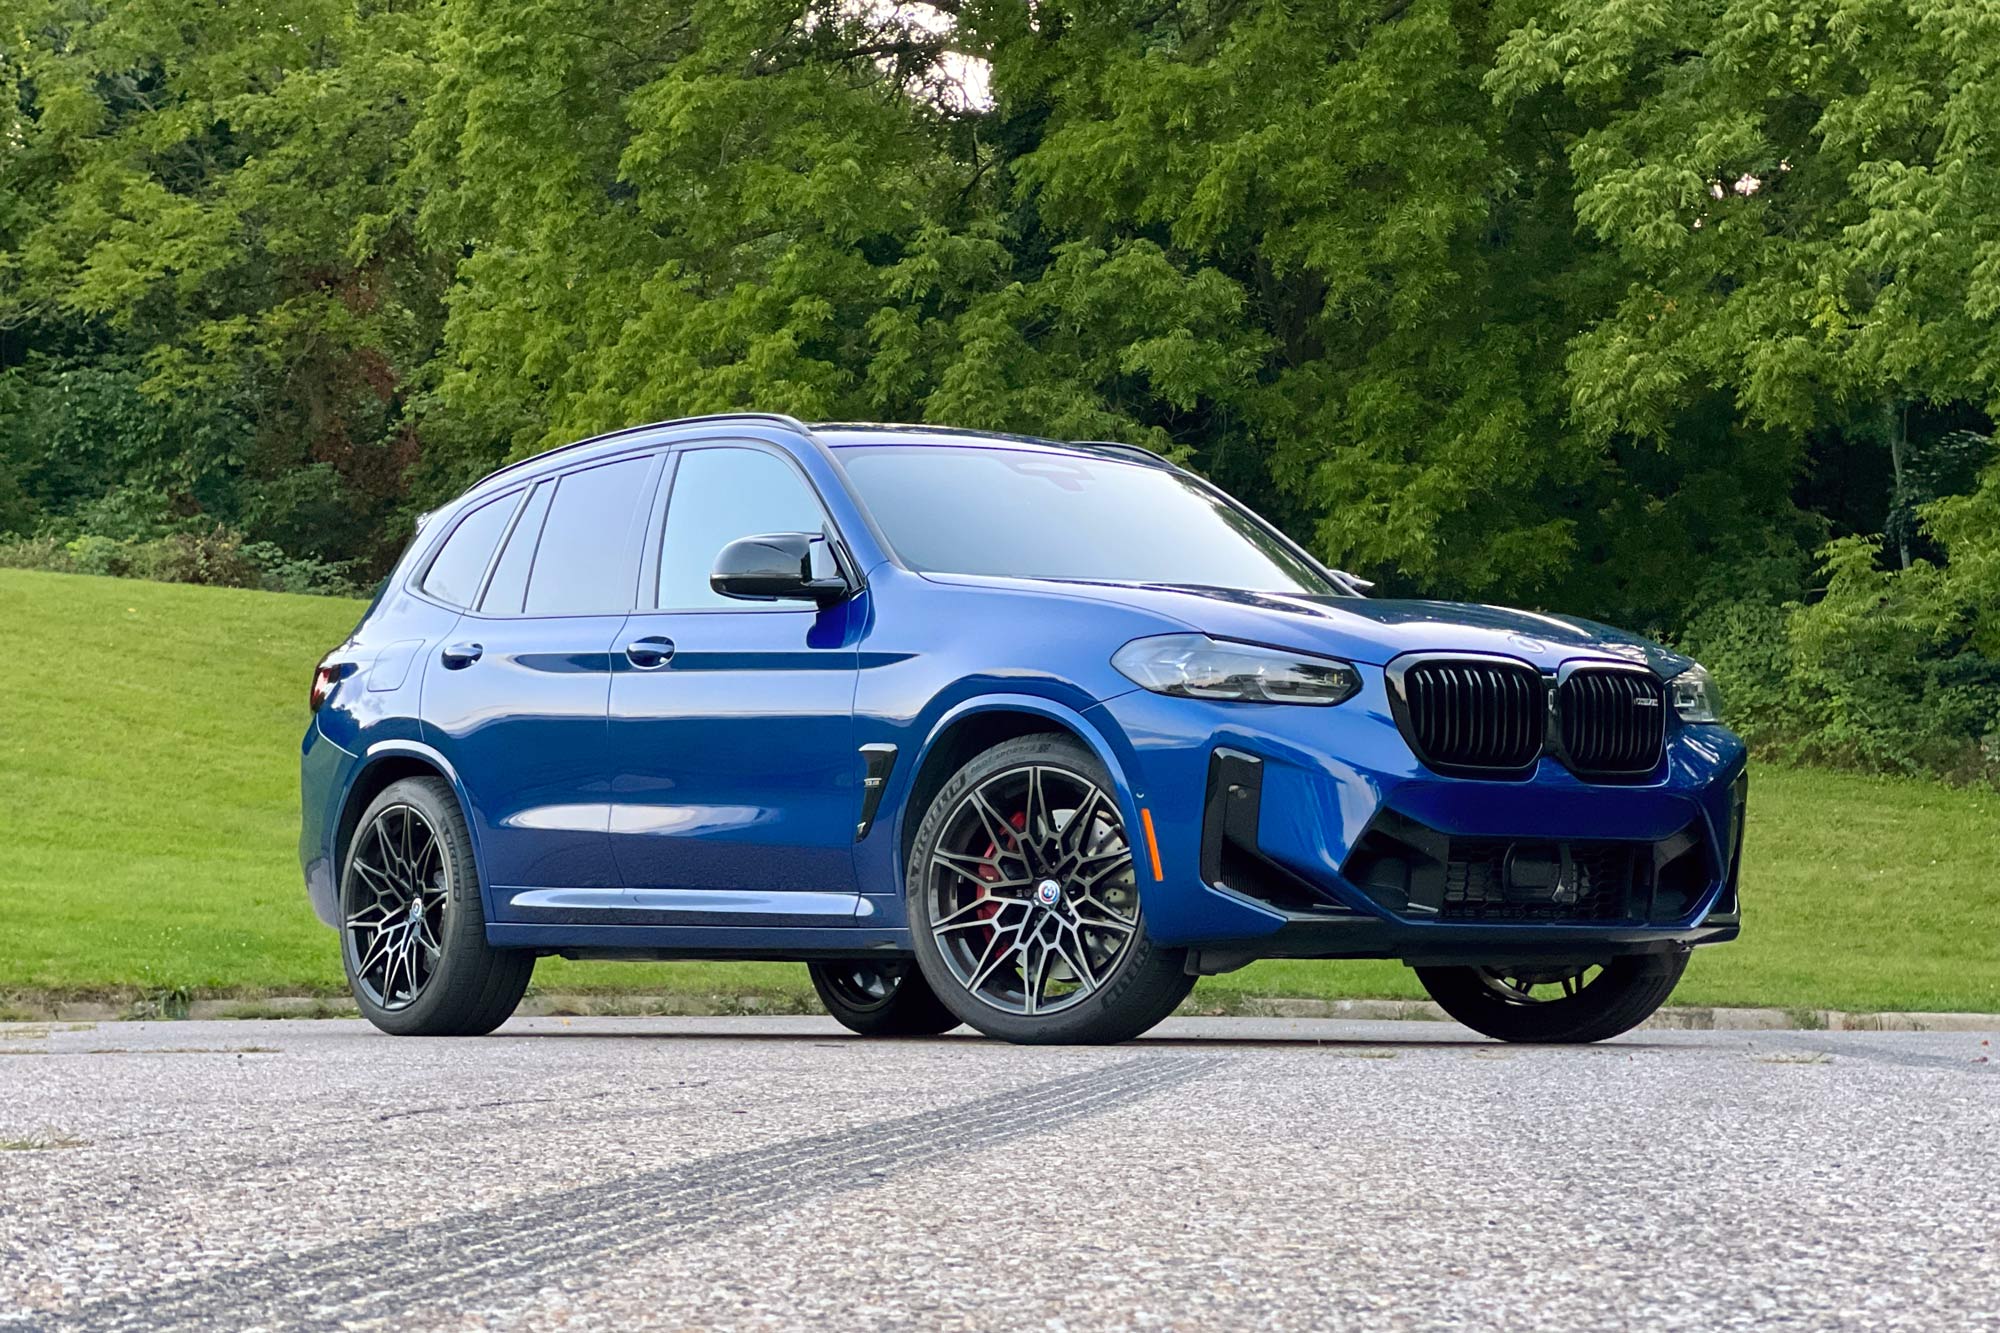 2023 BMW X3 M in Le Mans Blue front quarter parked in front of grass